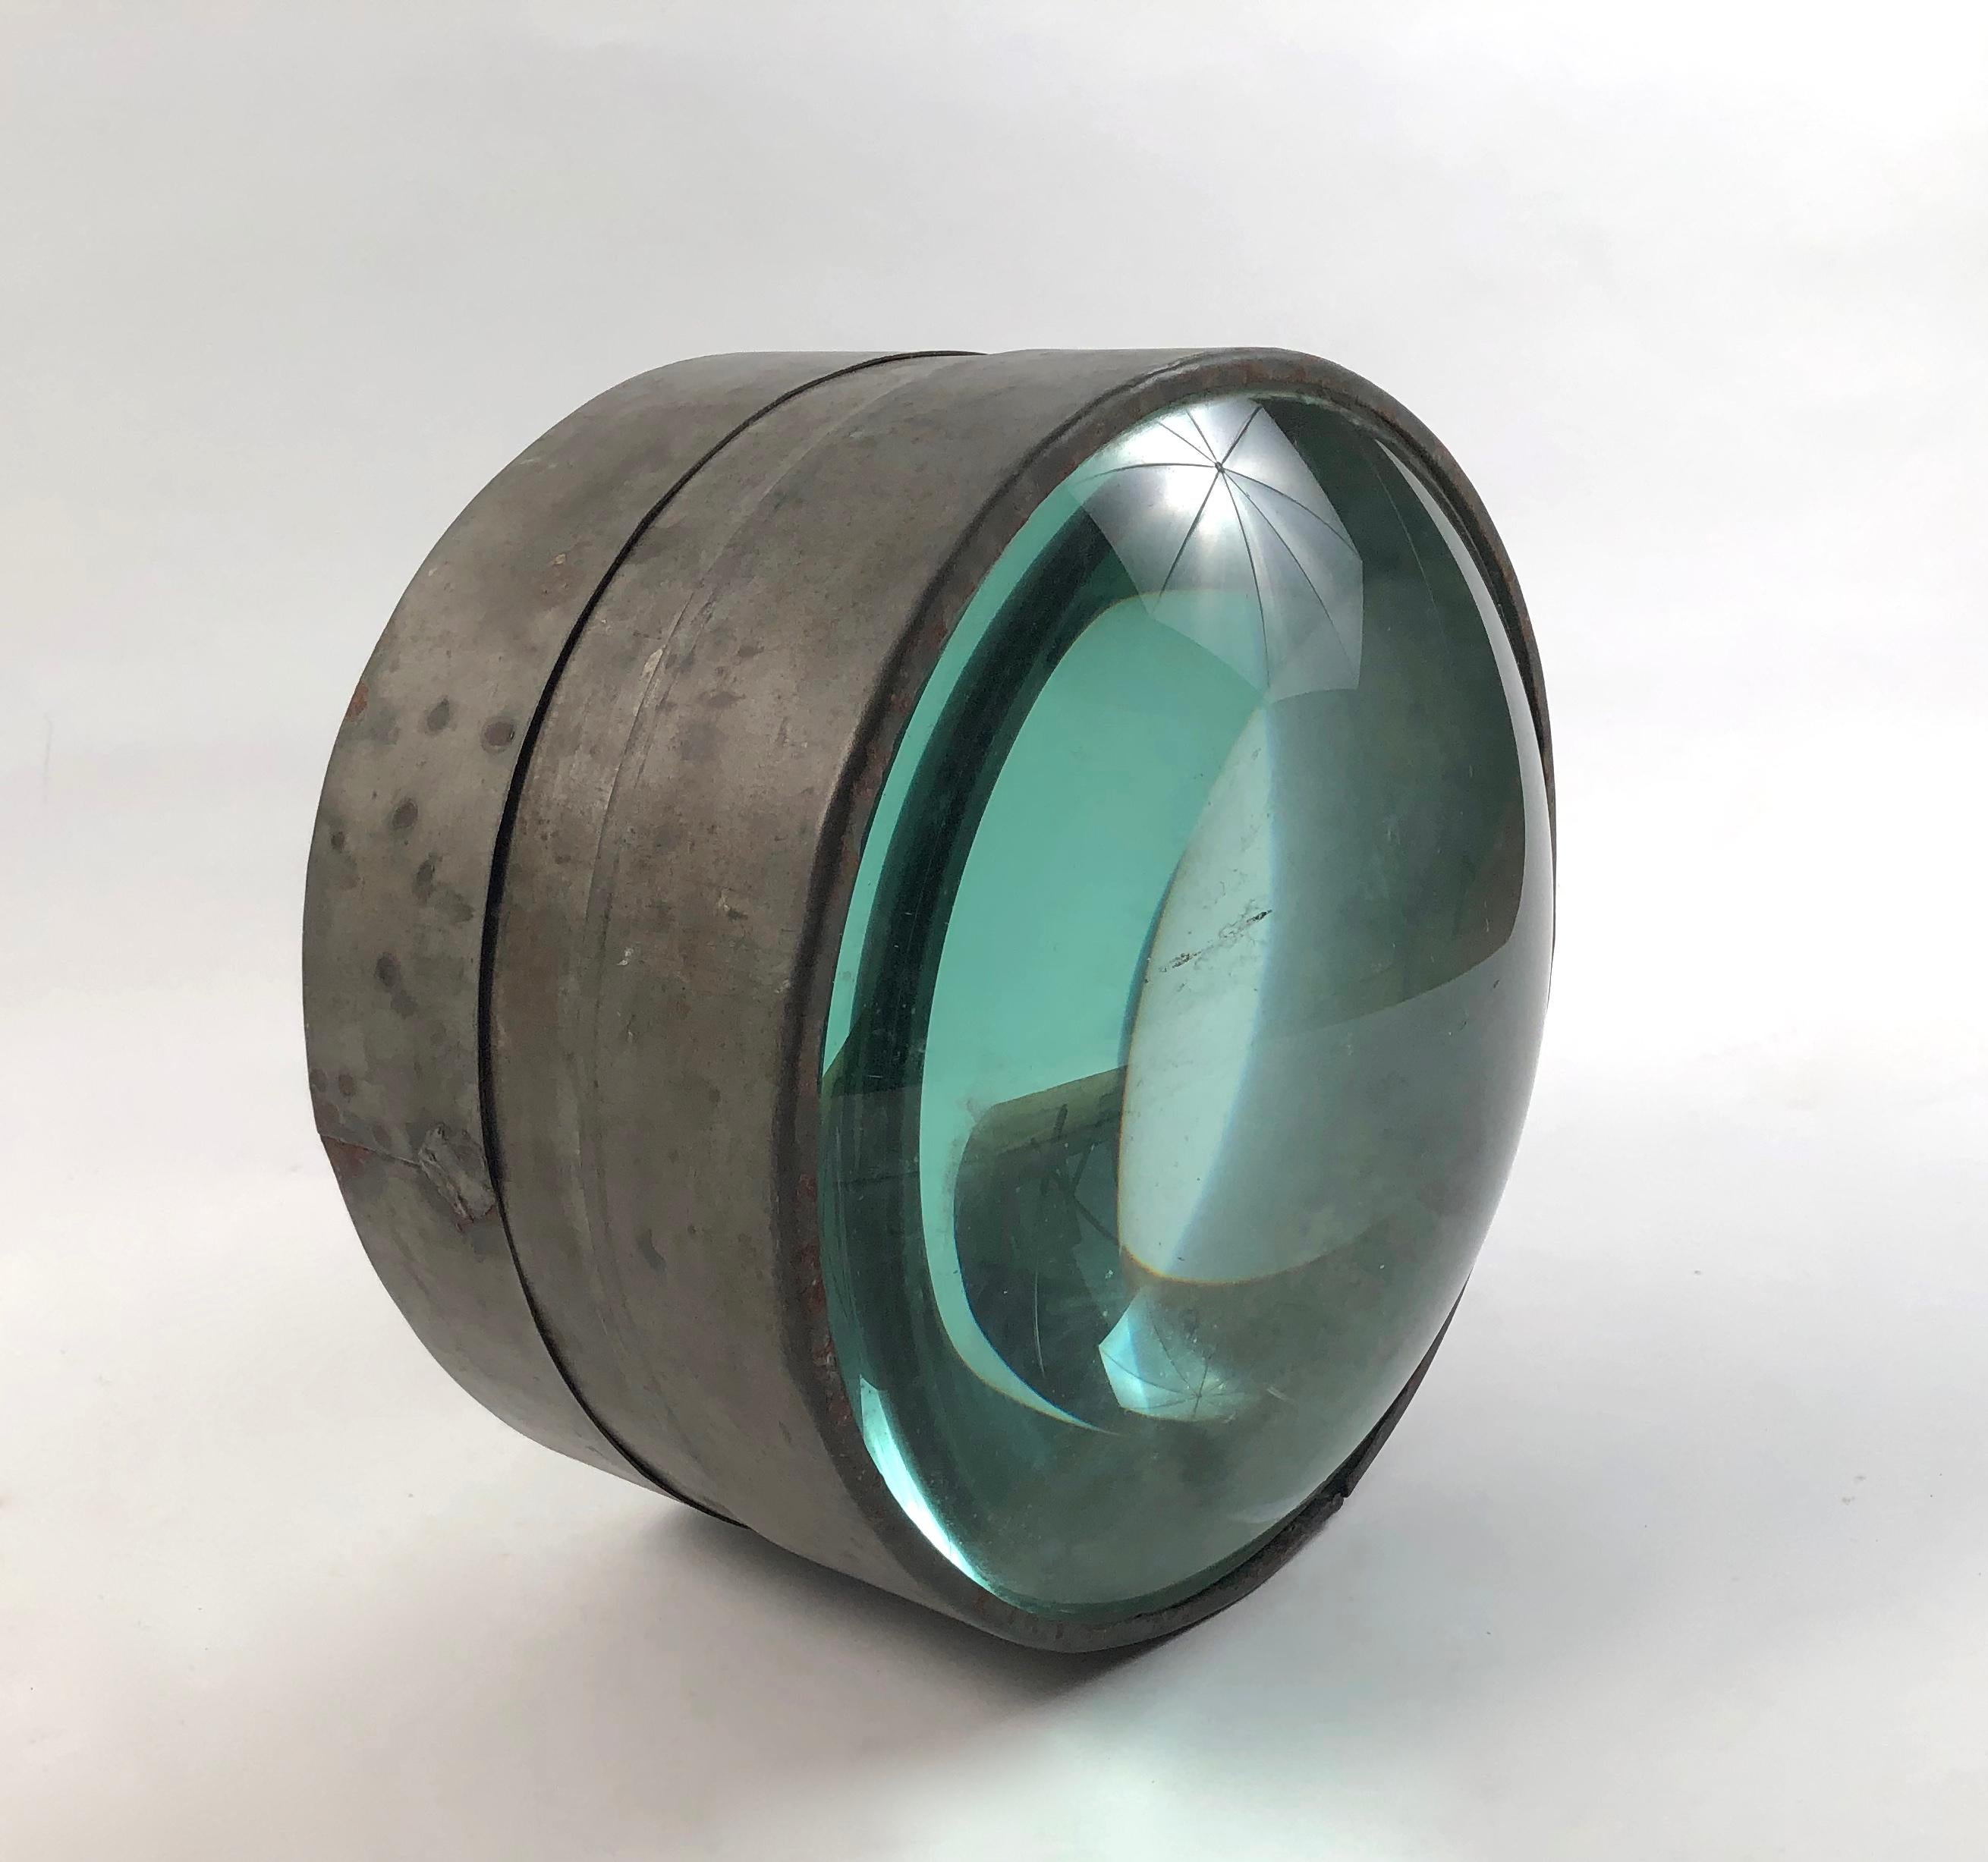 A rare 19th century light house lens, American, circa 1880s, the 2 magnifying convex glass elements contained in a tin or zinc band. This uncommon and beautiful object, both nautical and scientific is a unique tabletop or bookshelf sculpture that